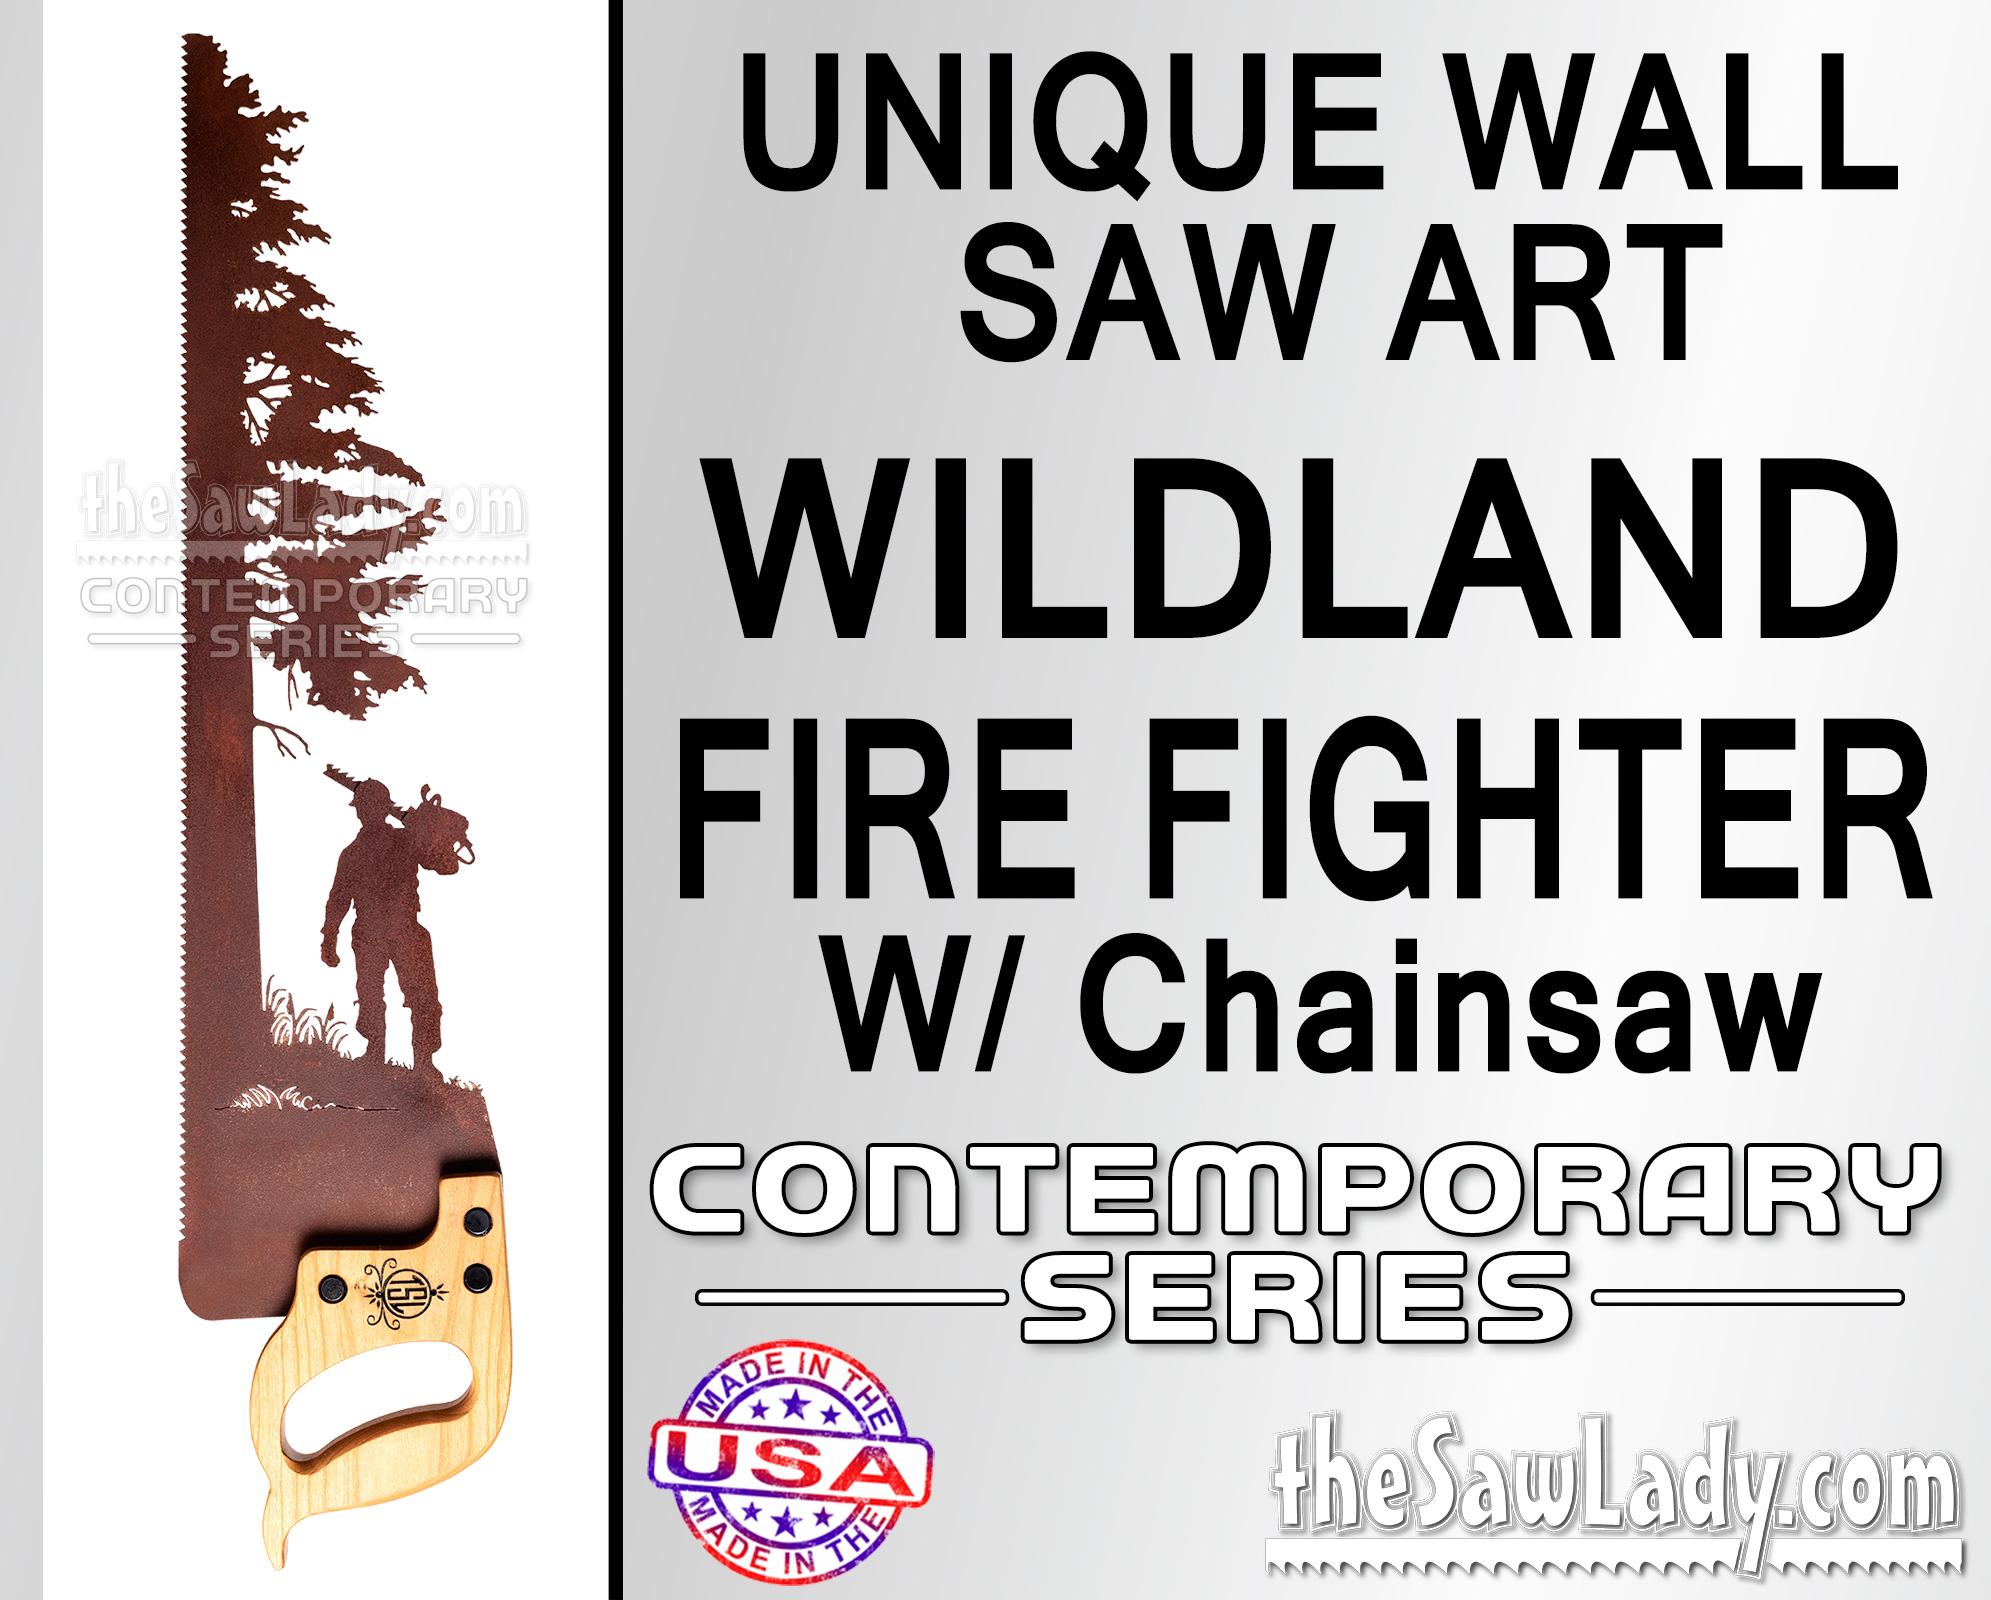 Wildland-SAW-fire-fighter-chainsaw-metal-wall-art-gift